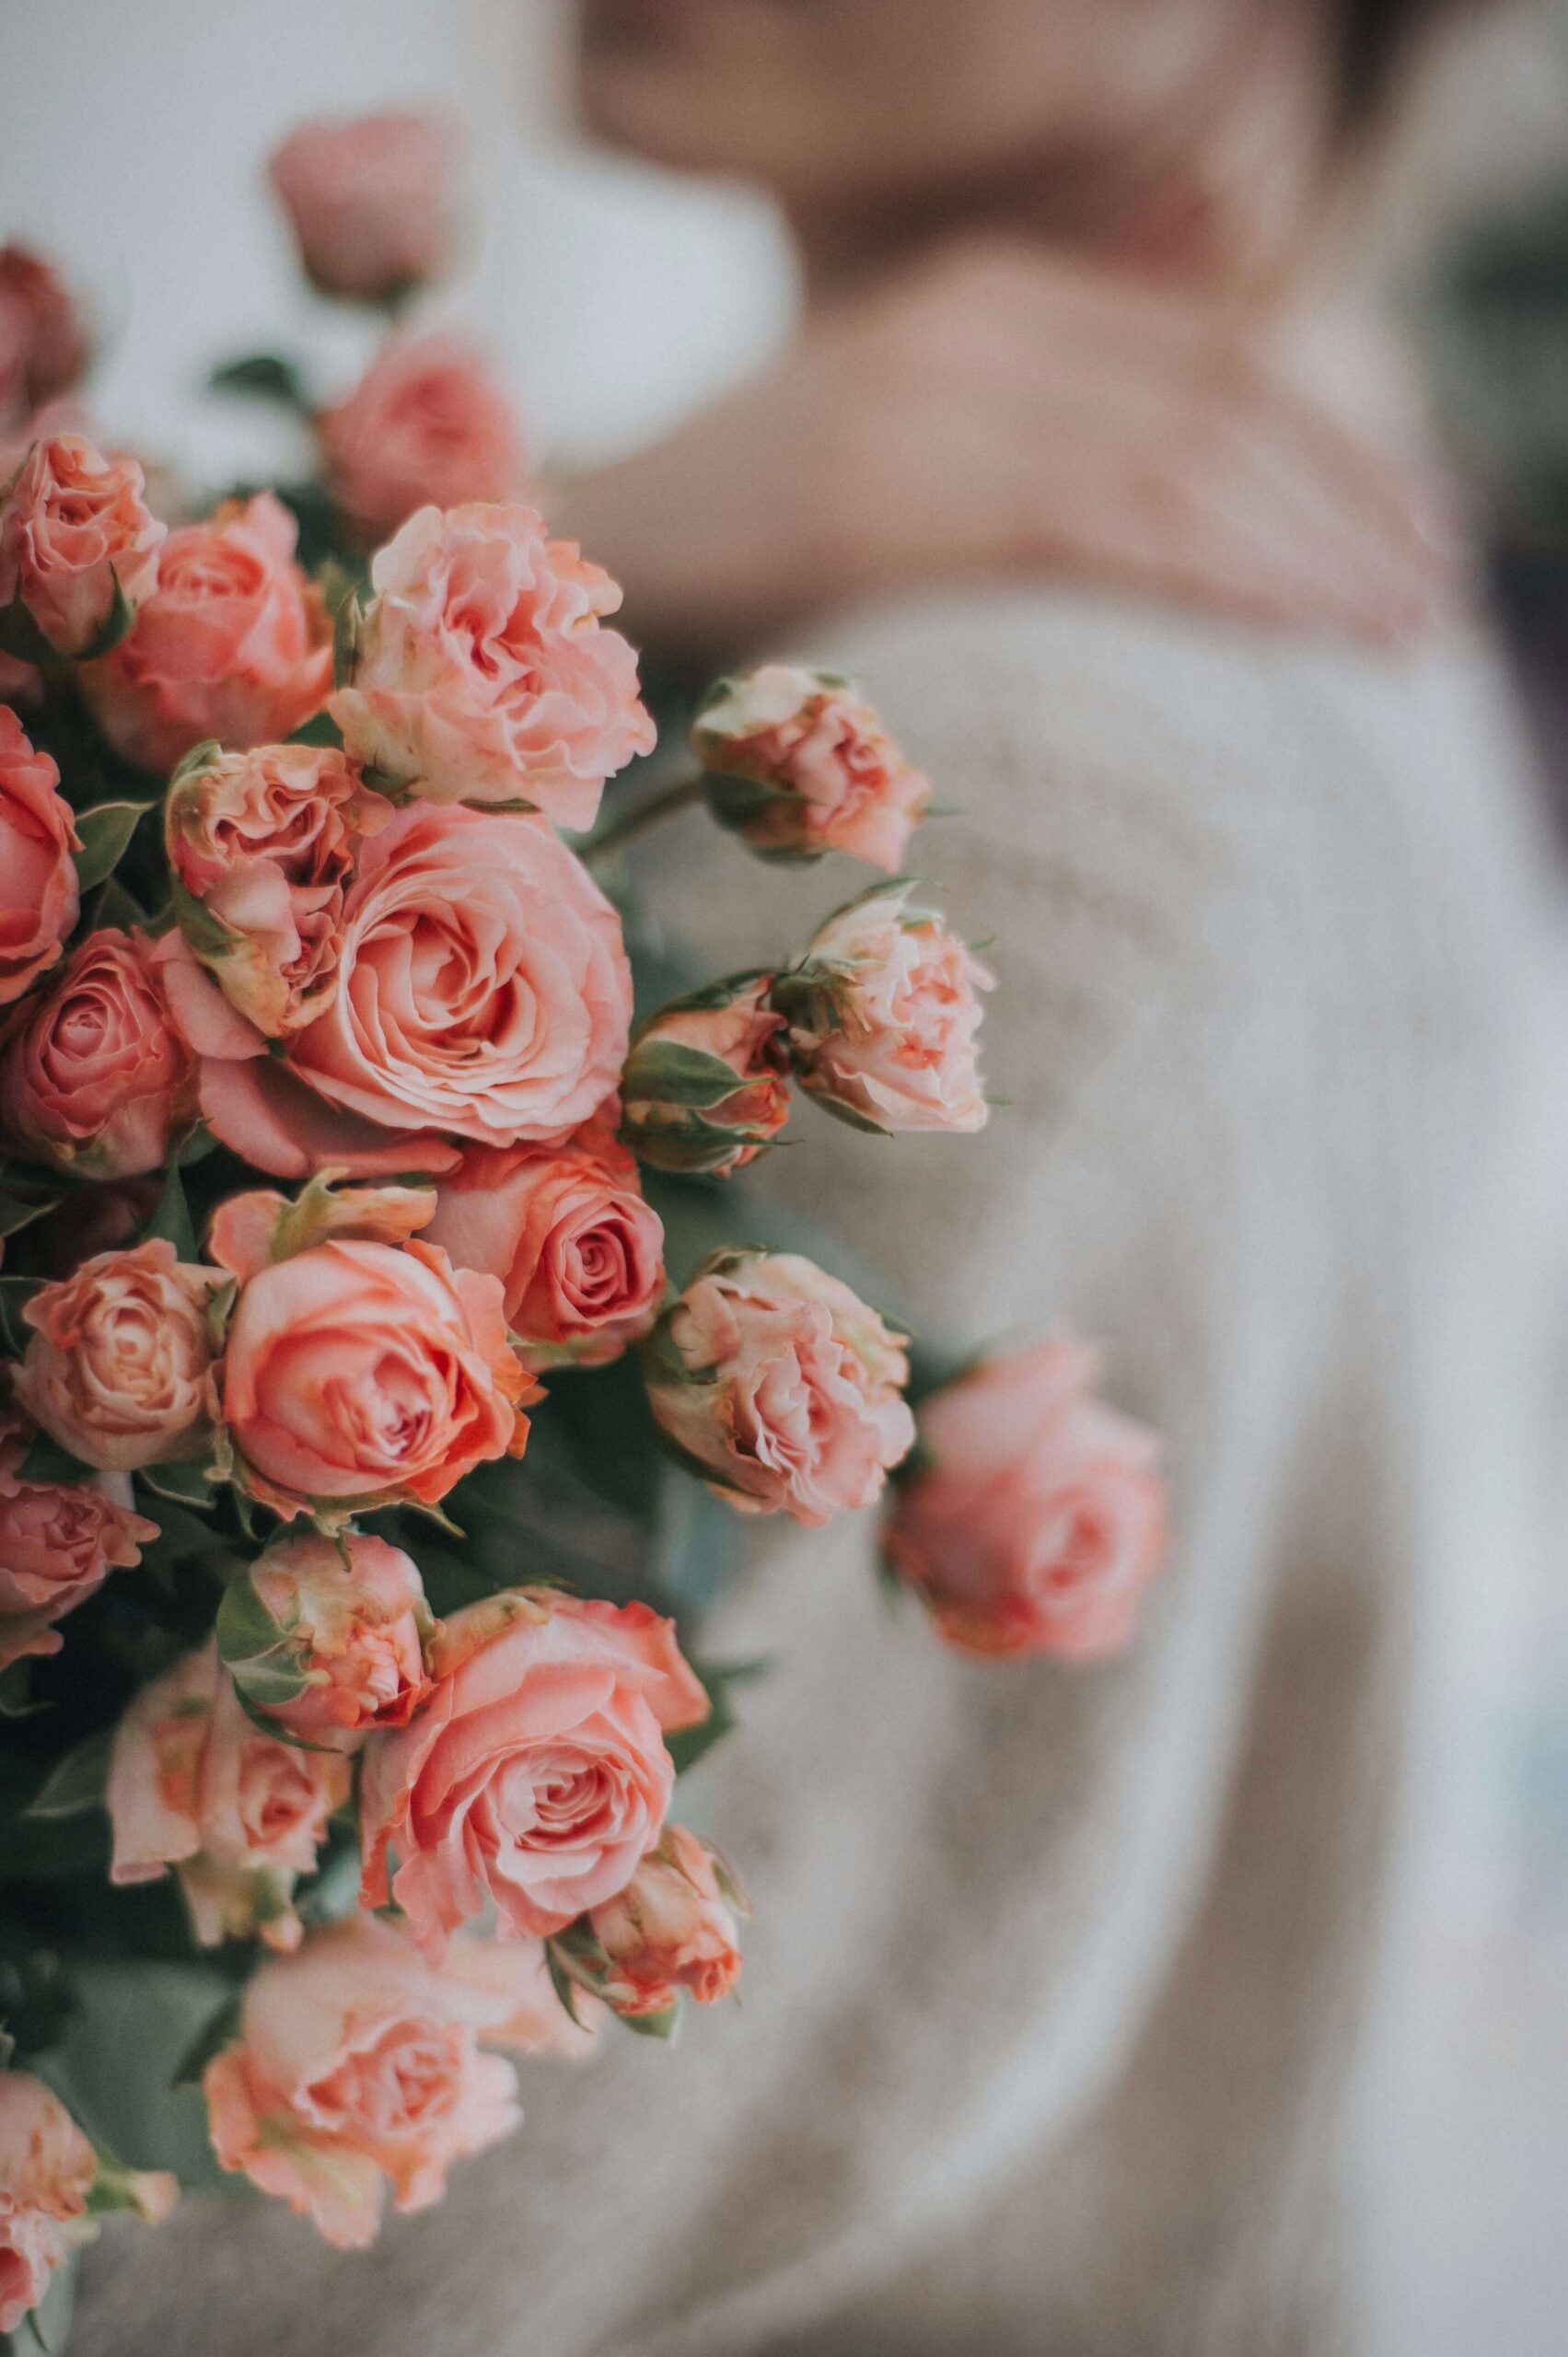 A woman holding a bouquet of pink roses. Anxiety counseling in NYC, NY can help you improve your well-being. Begin working with an anxiety therapist today.